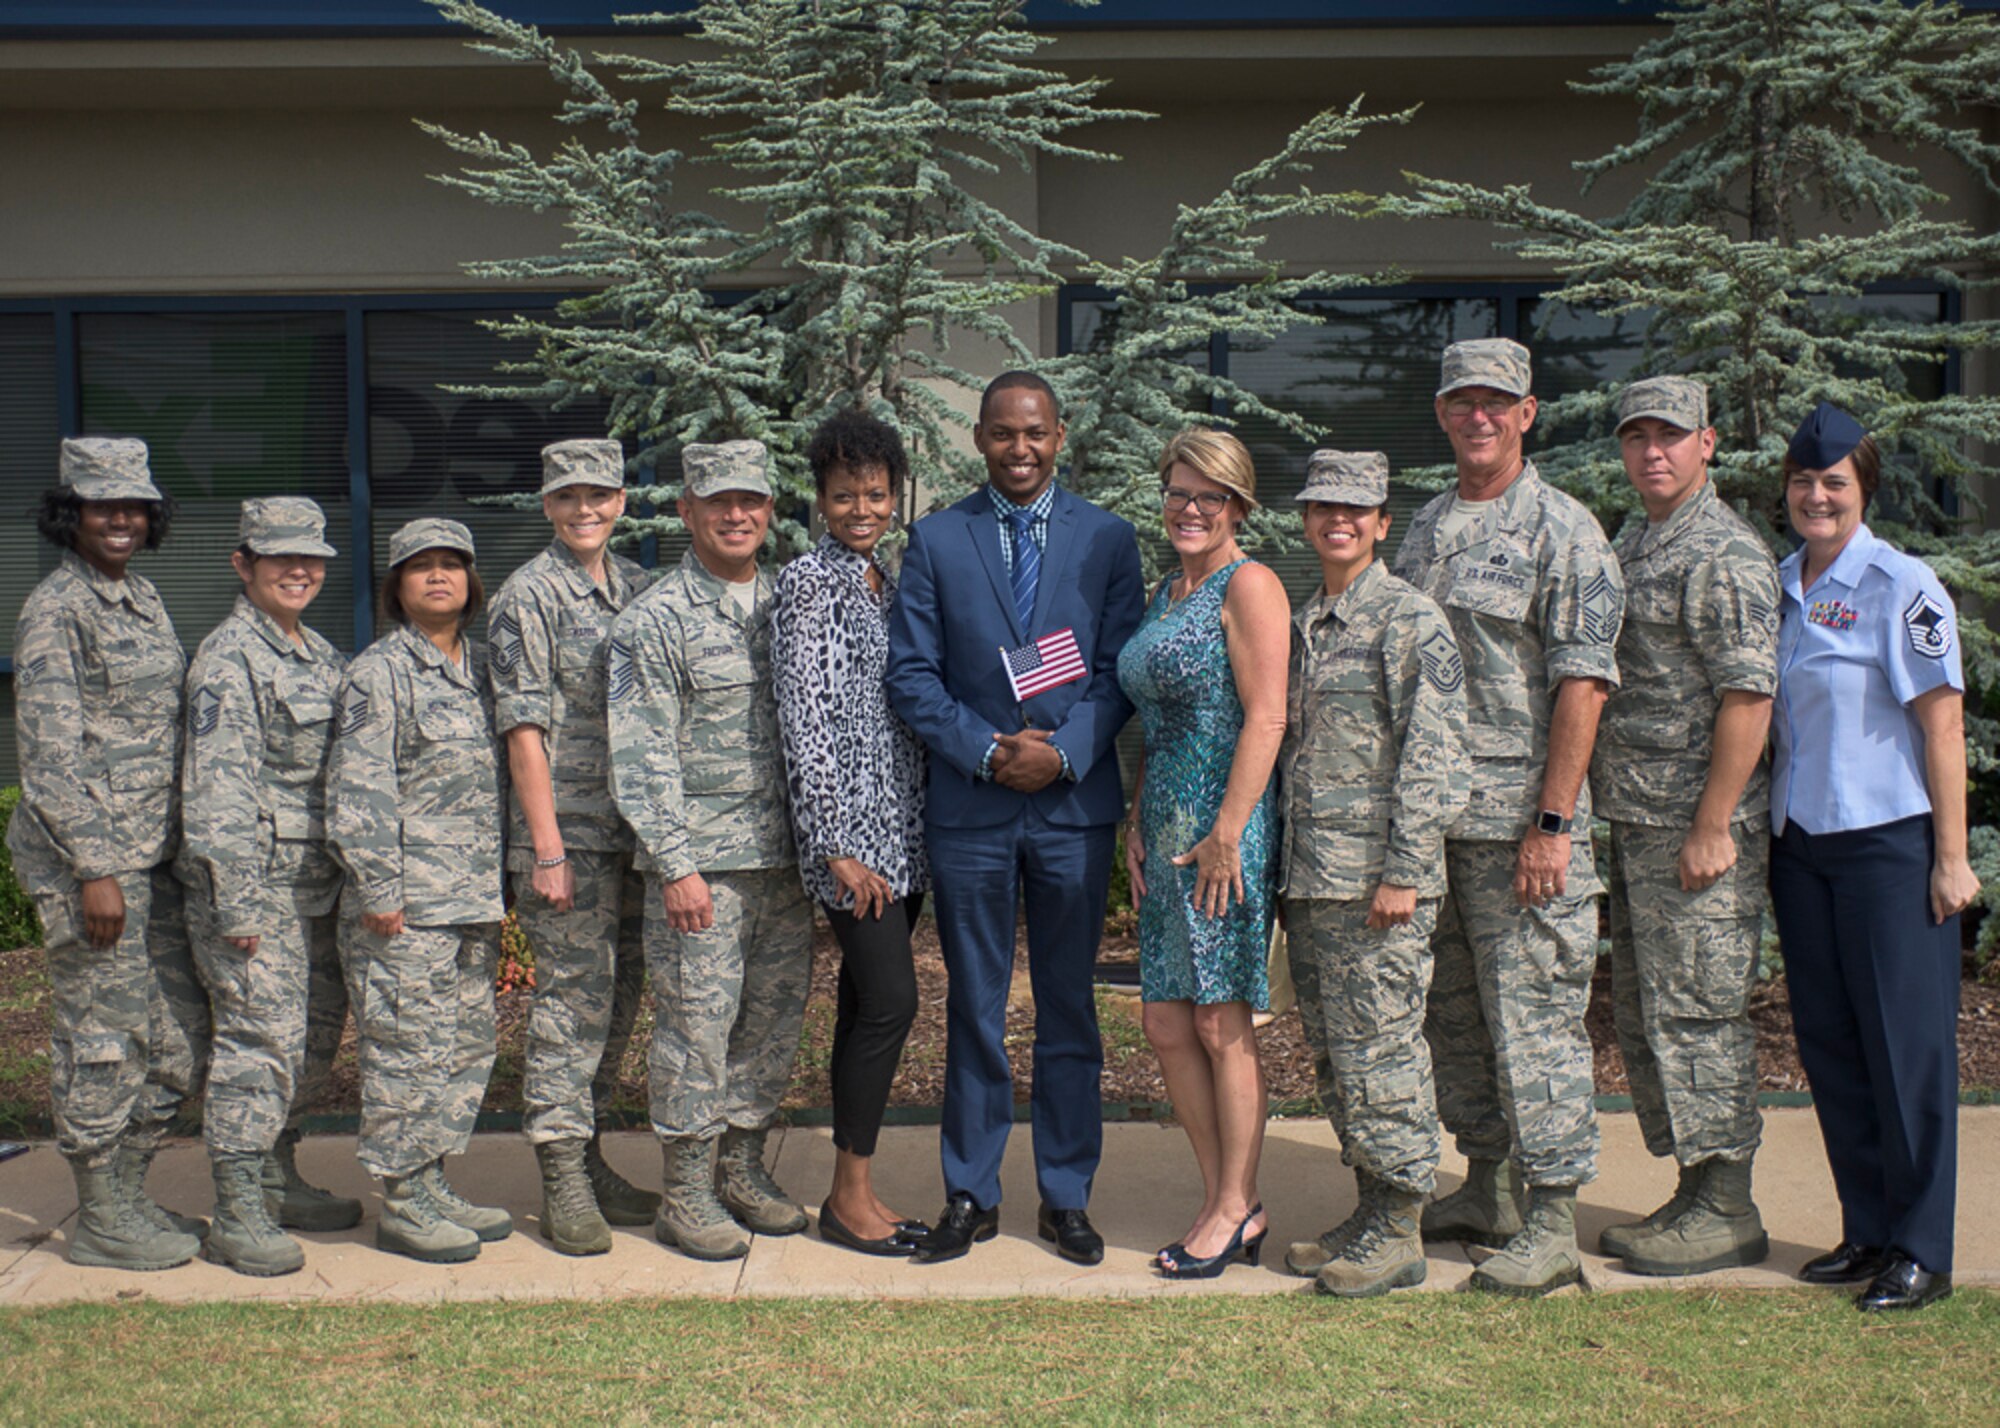 Airman 1st Class Joseph Mwangi, 137th Special Operations Force Support Squadron, became a U.S. citizen, Sept. 13, 2016, in Oklahoma City. His fellow 137th Special Operations Wing Airmen were present at the ceremony to show their support for his once in a lifetime accomplishment. (U.S. Air National Guard photo by Senior Airman Kasey Phipps)